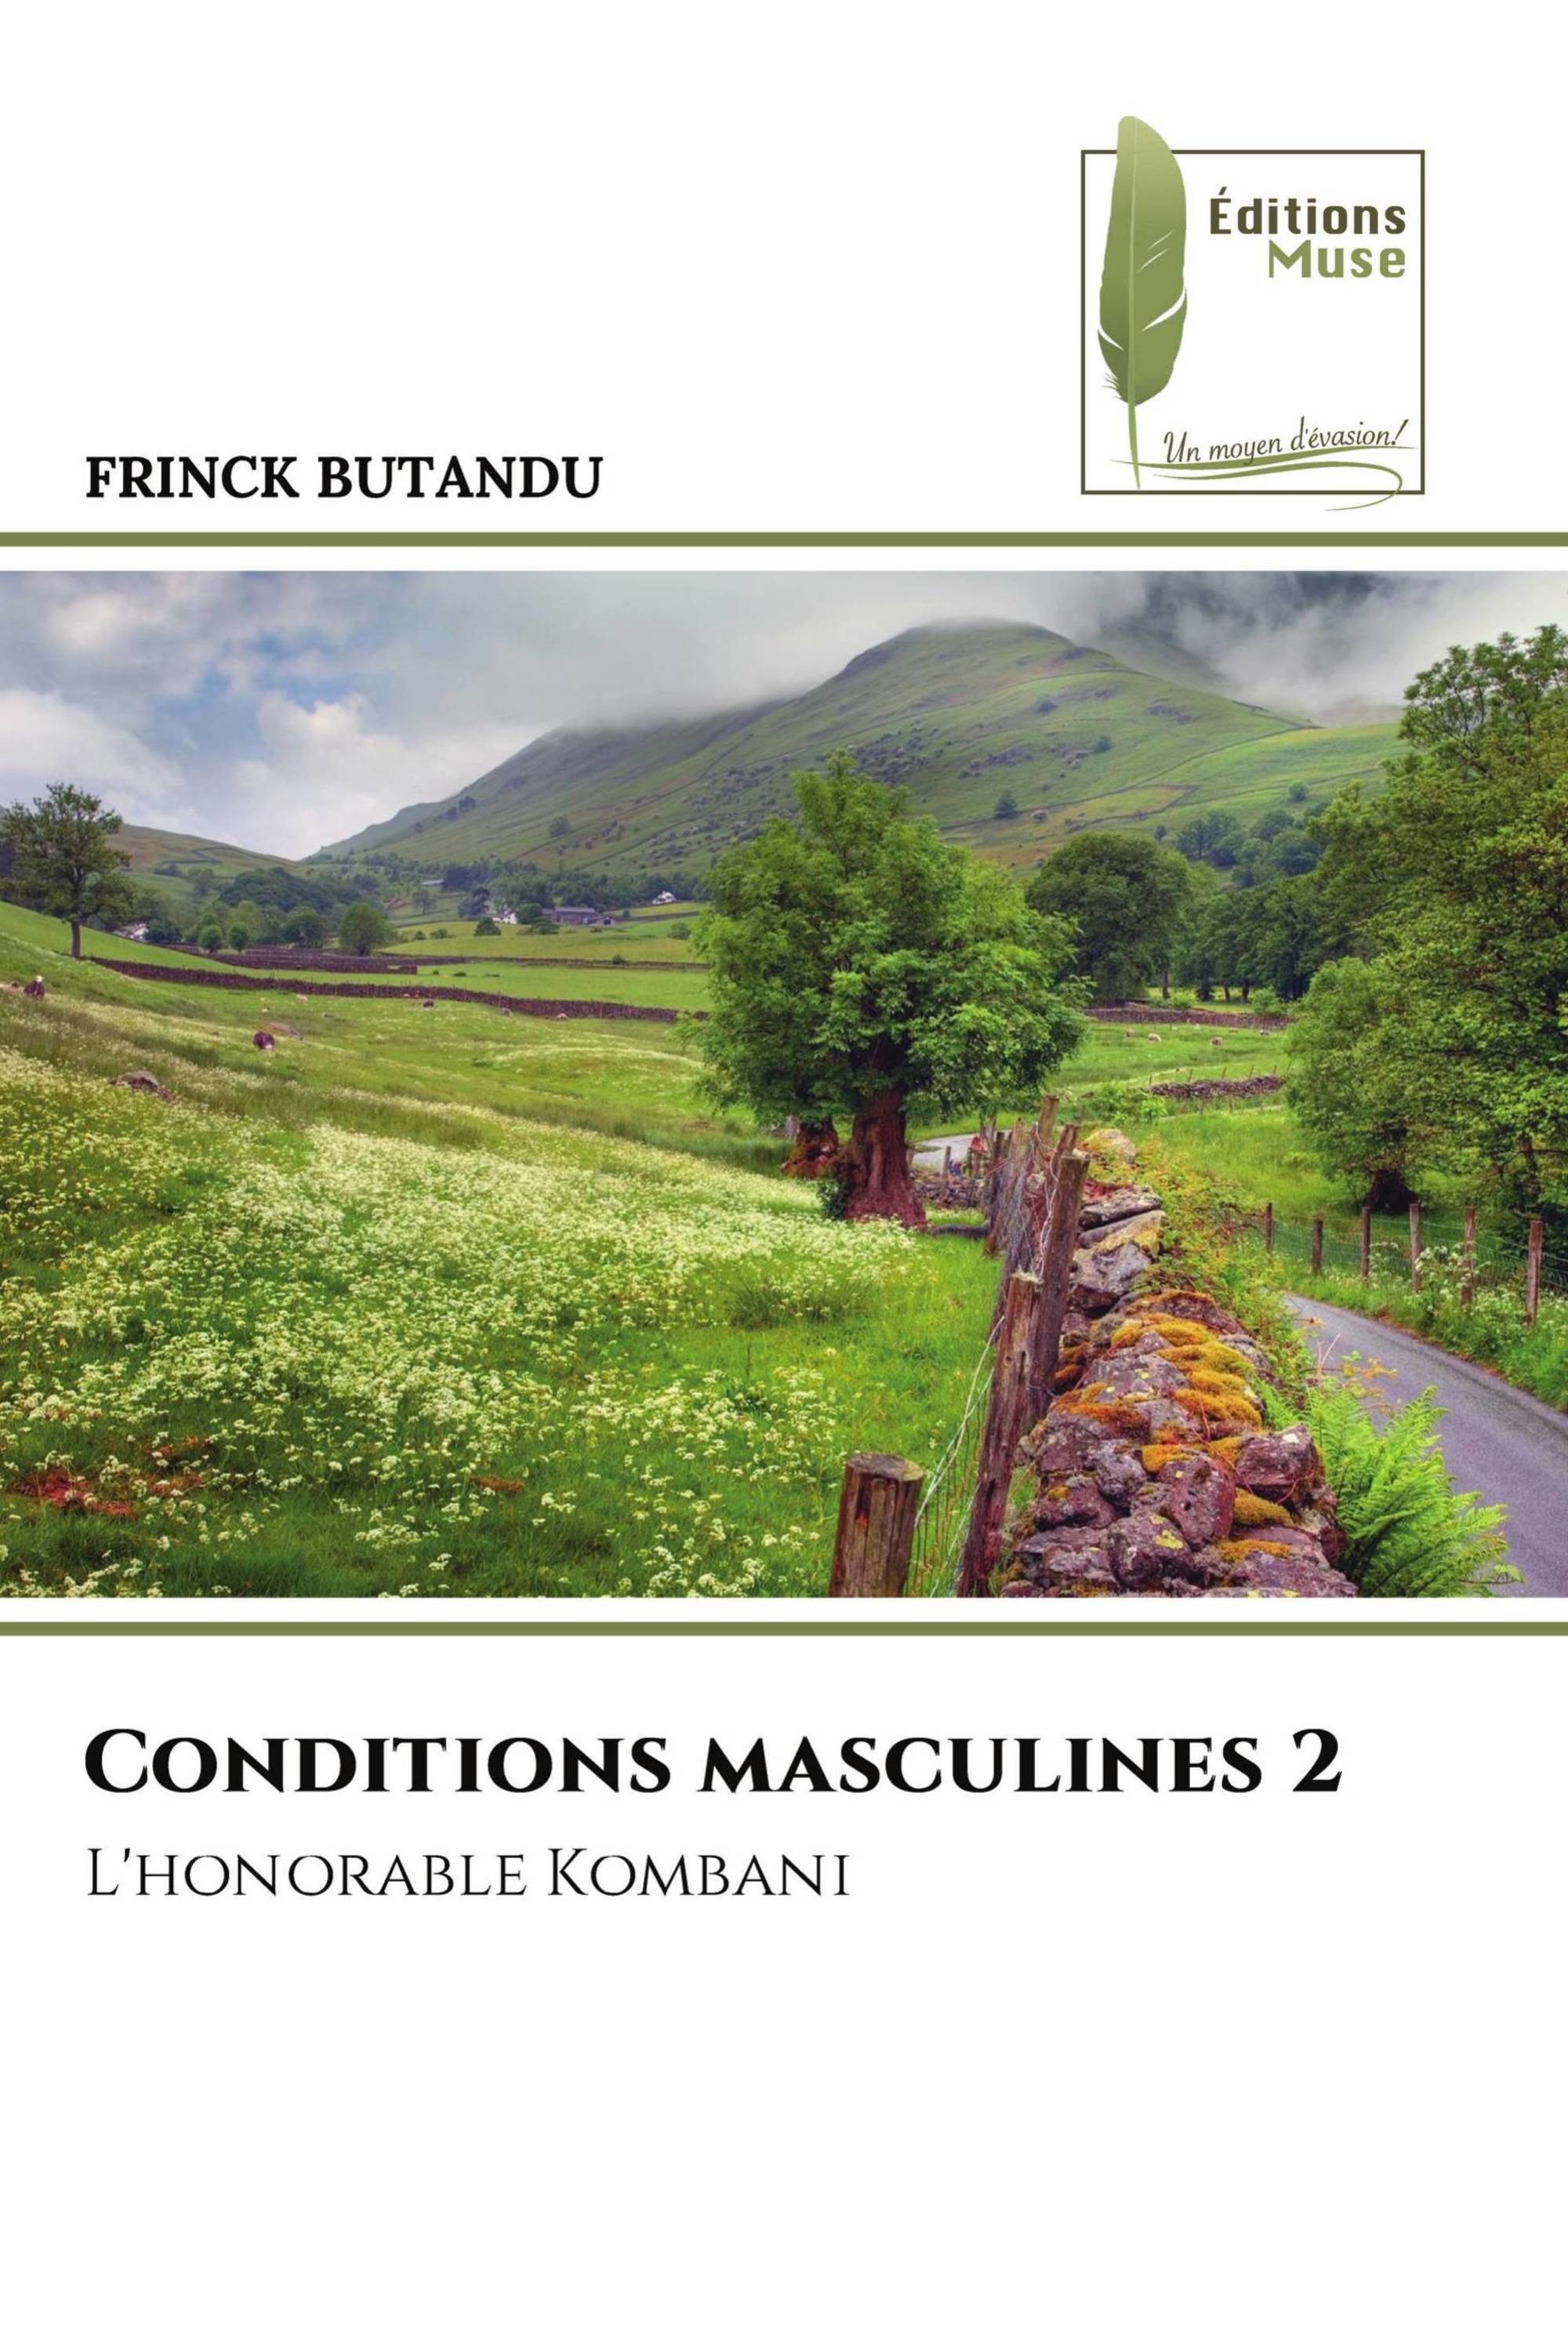 Conditions masculines 2